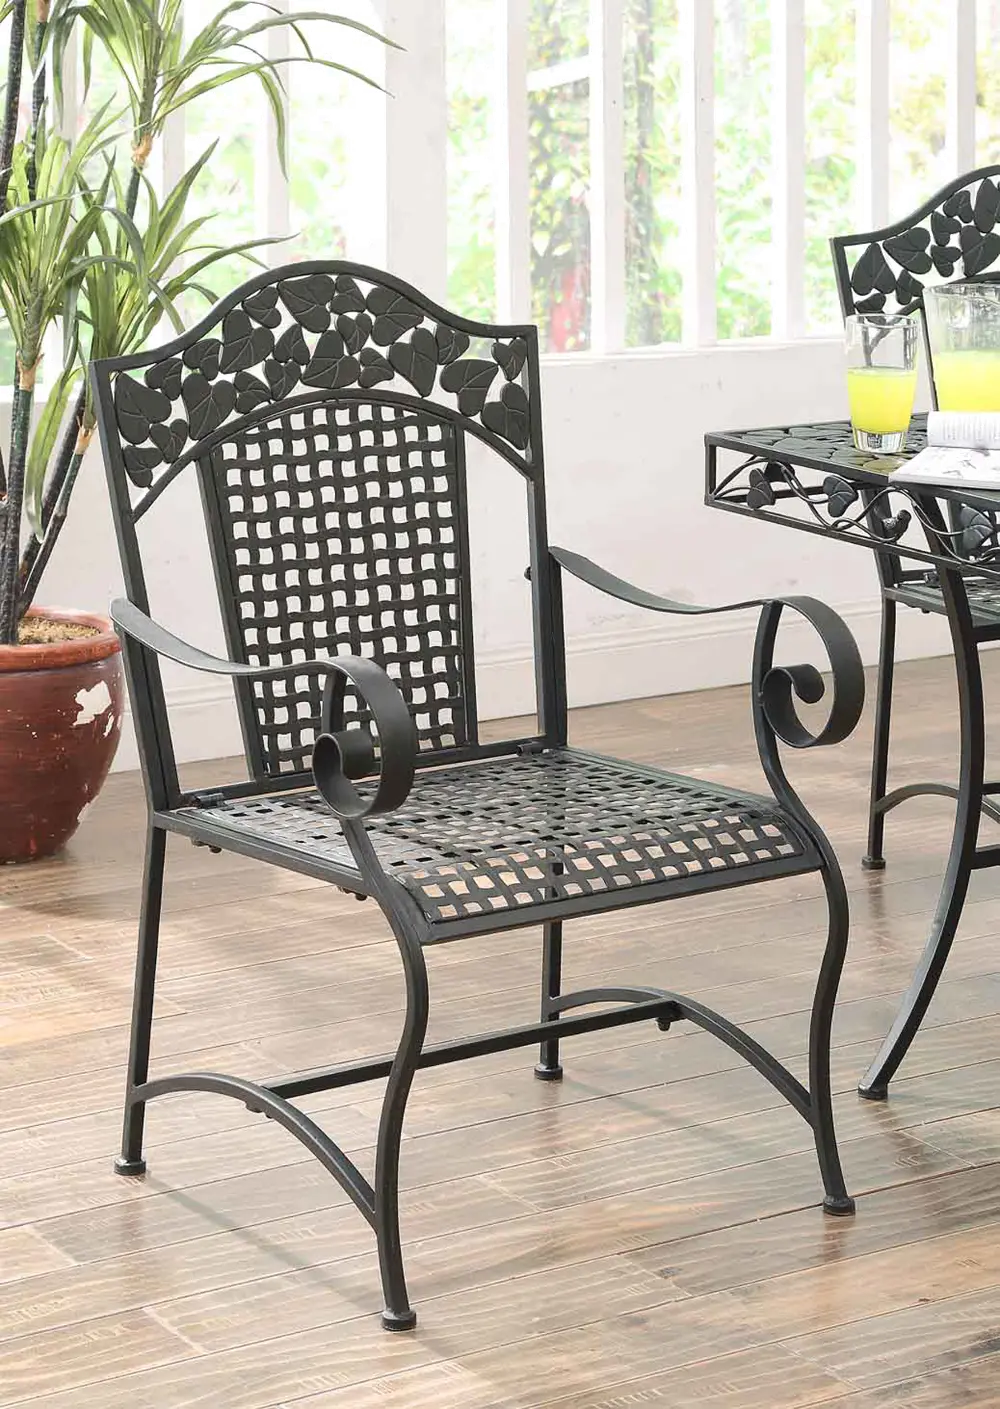 2 Metal Outdoor Patio Chairs - Ivy League -1